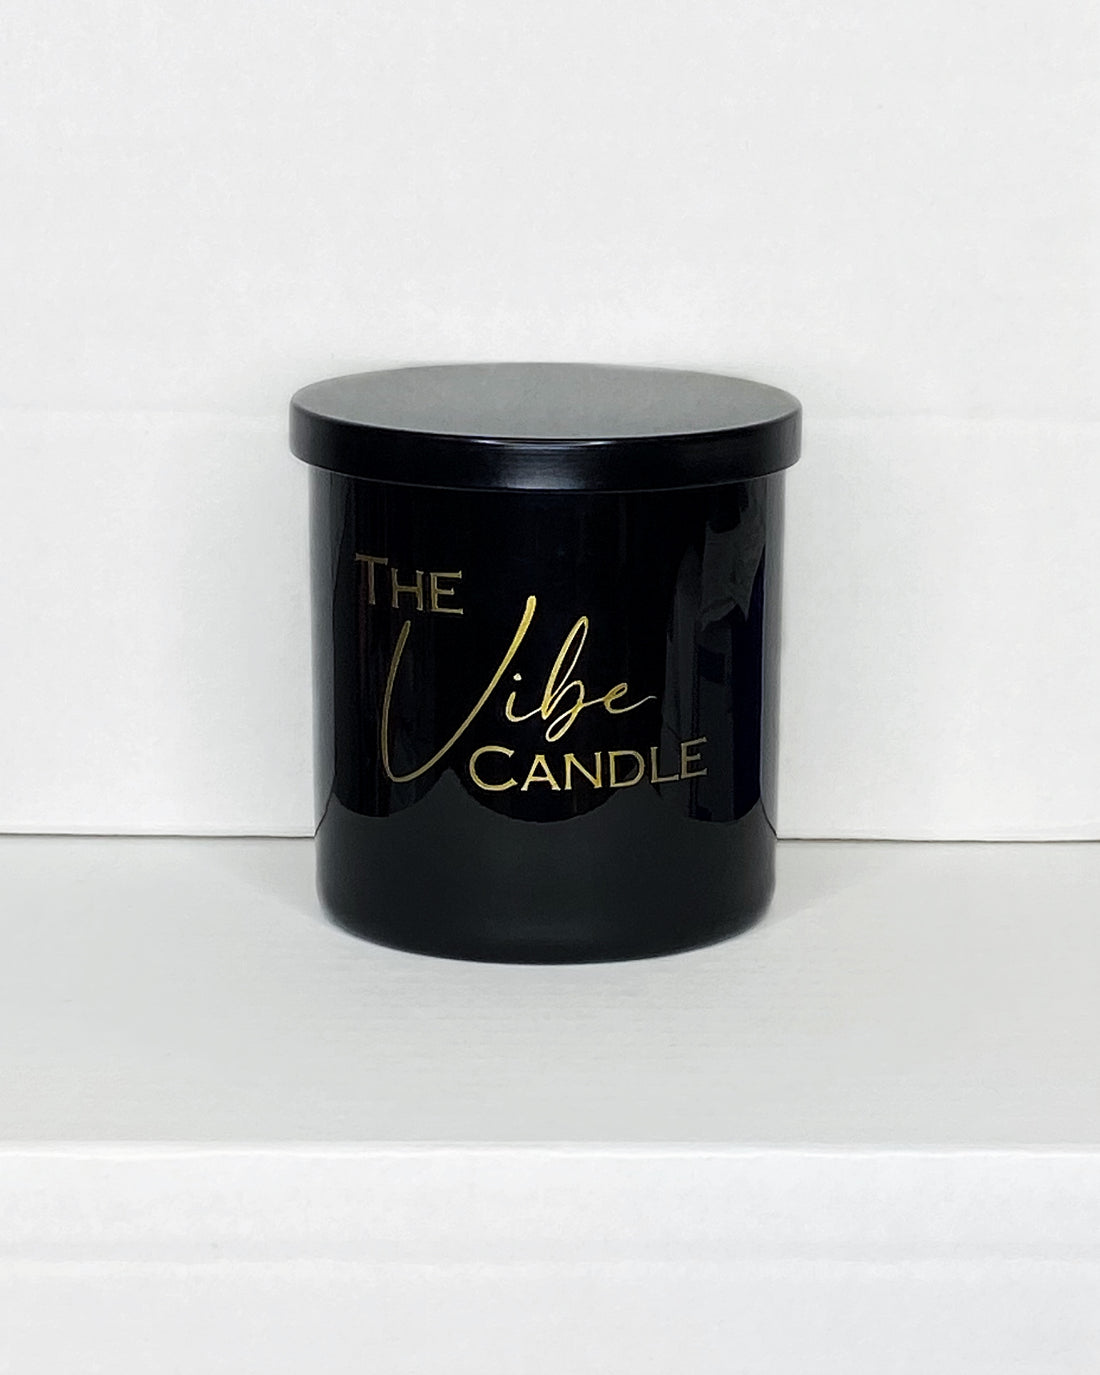 The Vibe Candle - 3 Month Gift